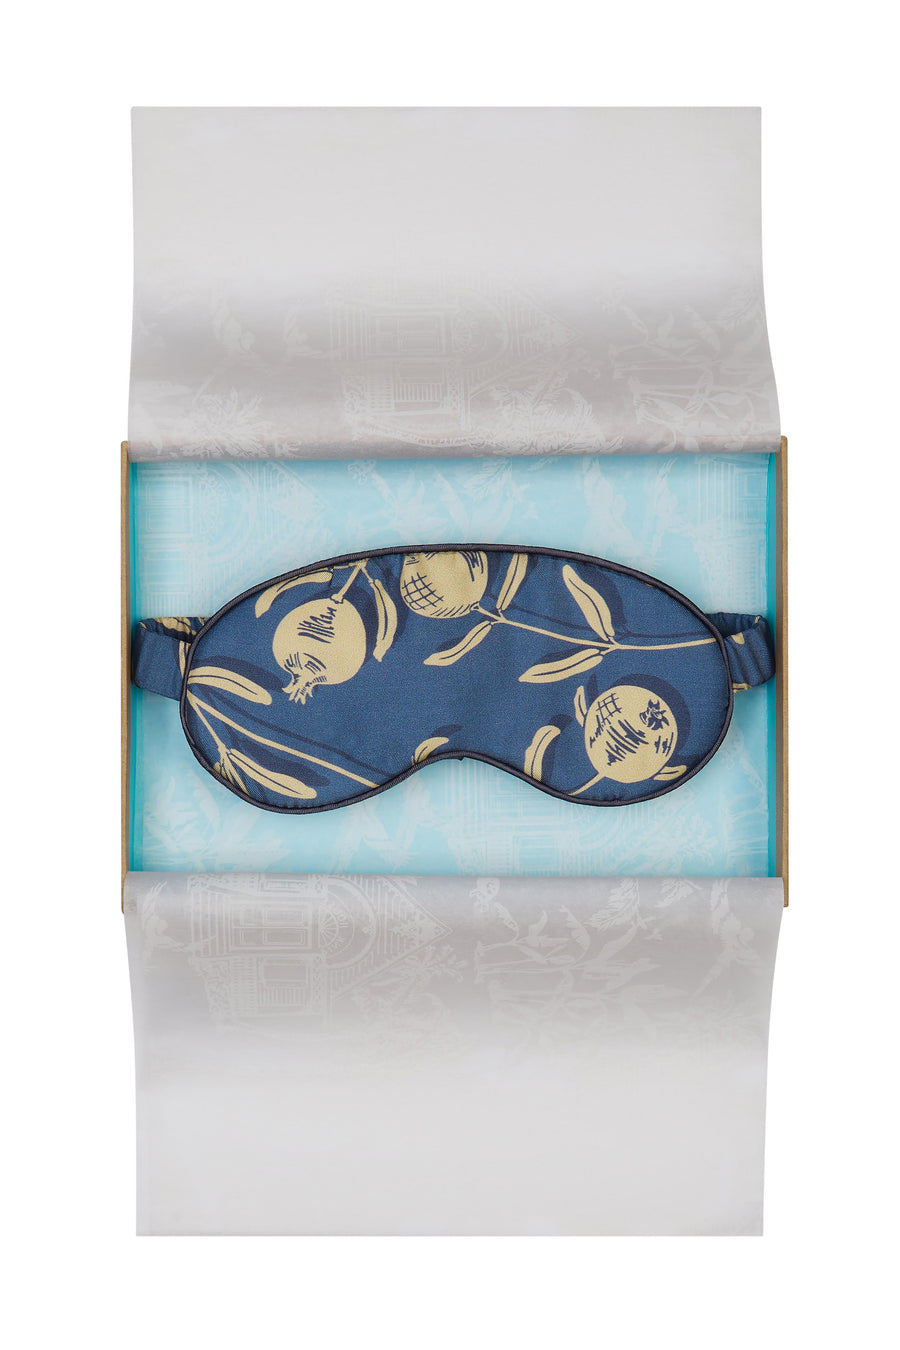 Luxury silk eye mask in gold and navy Pomegranate print. Limited edition sleepwear accessories by Lotty B Mustique. Handmade in England